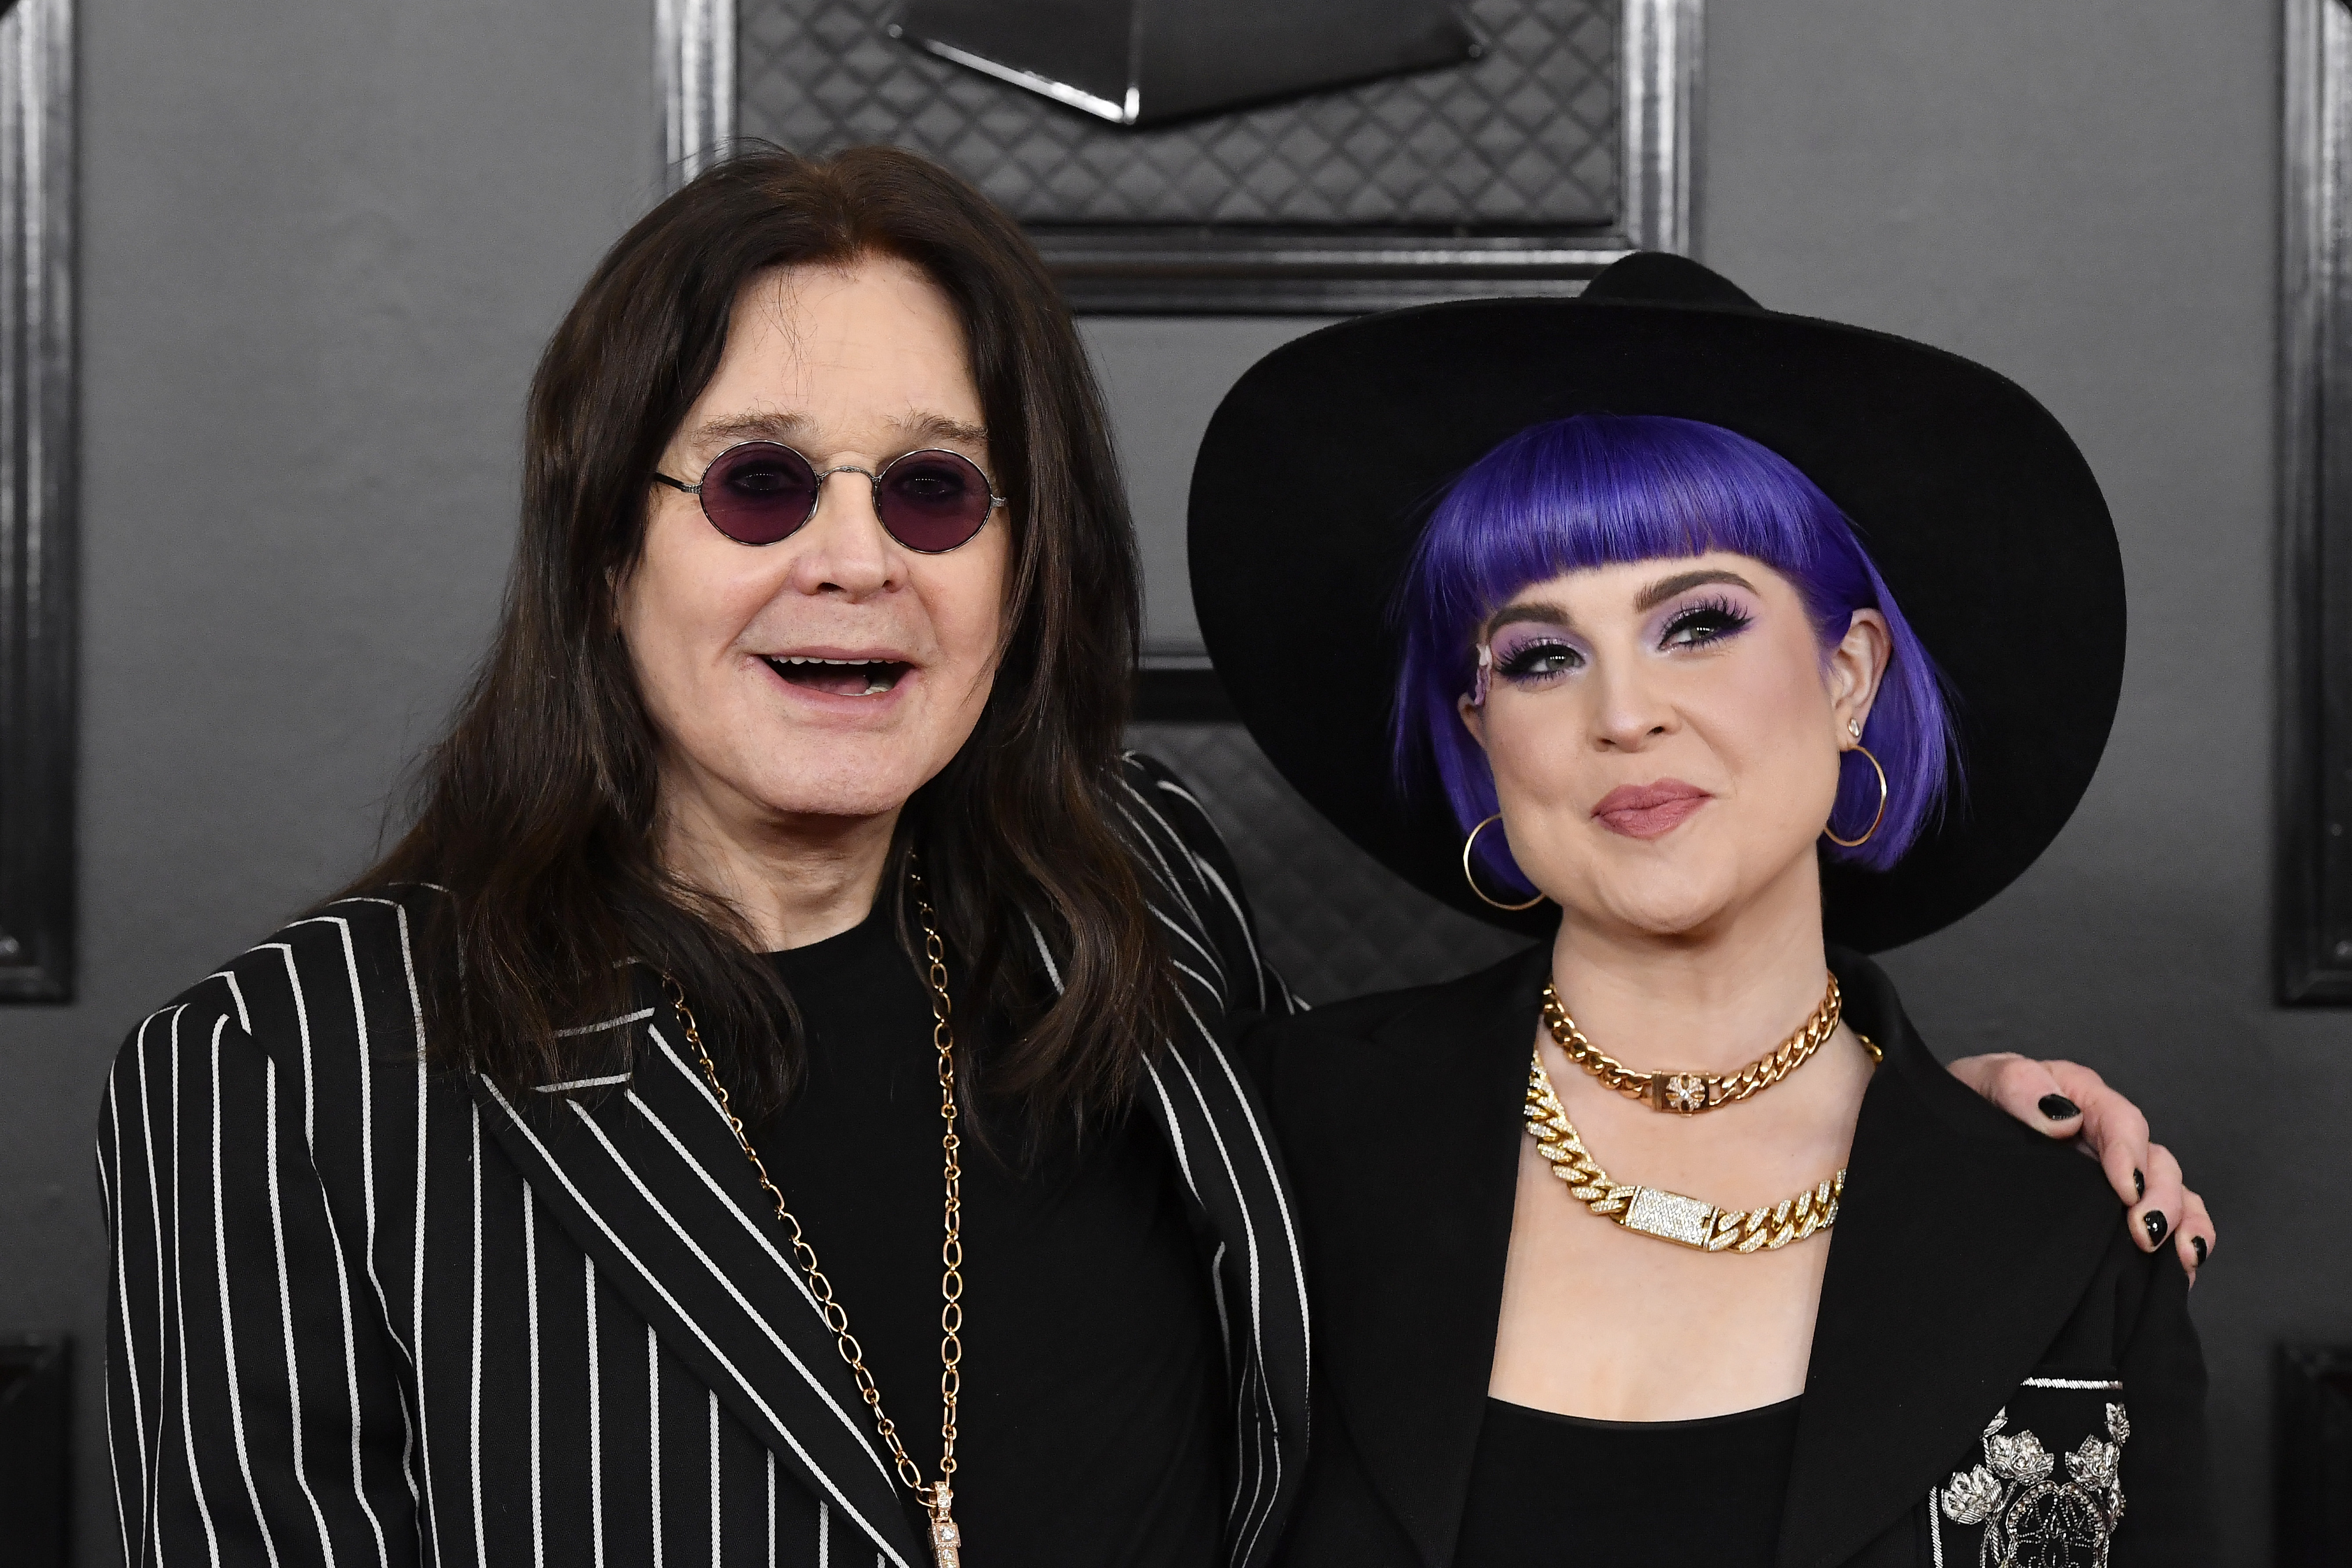 Ozzy and Kelly Osbourne at the 62nd Annual Grammy Awards in Los Angeles, 2020 | Source: Getty Imags